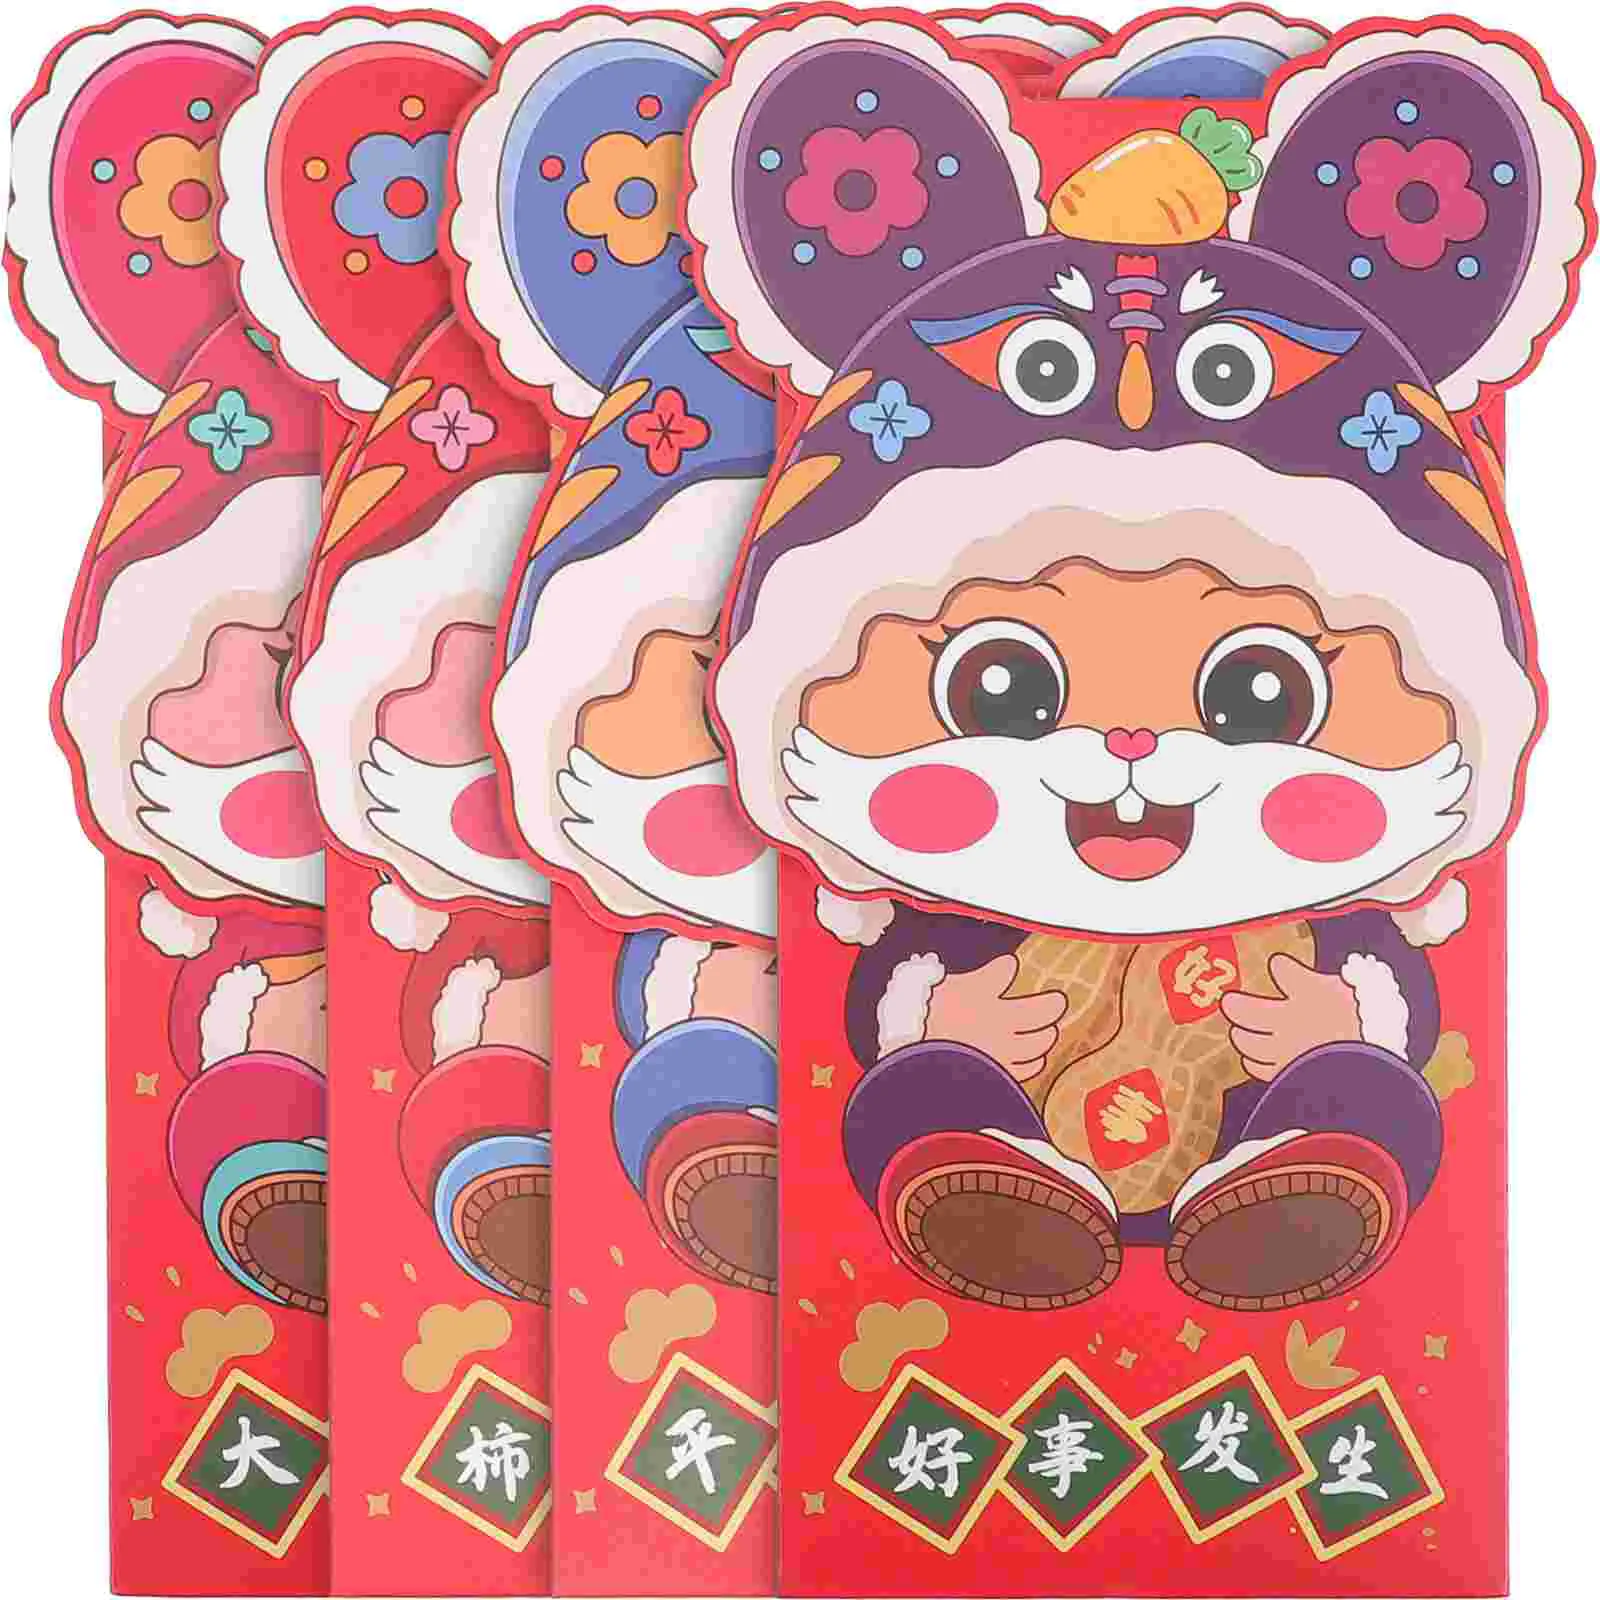 

Year Red New Envelopes Money Envelope Rabbit Chinese Packets Pocket Packet Festival Spring The Lunar Paper Hongbao Luck Lucky